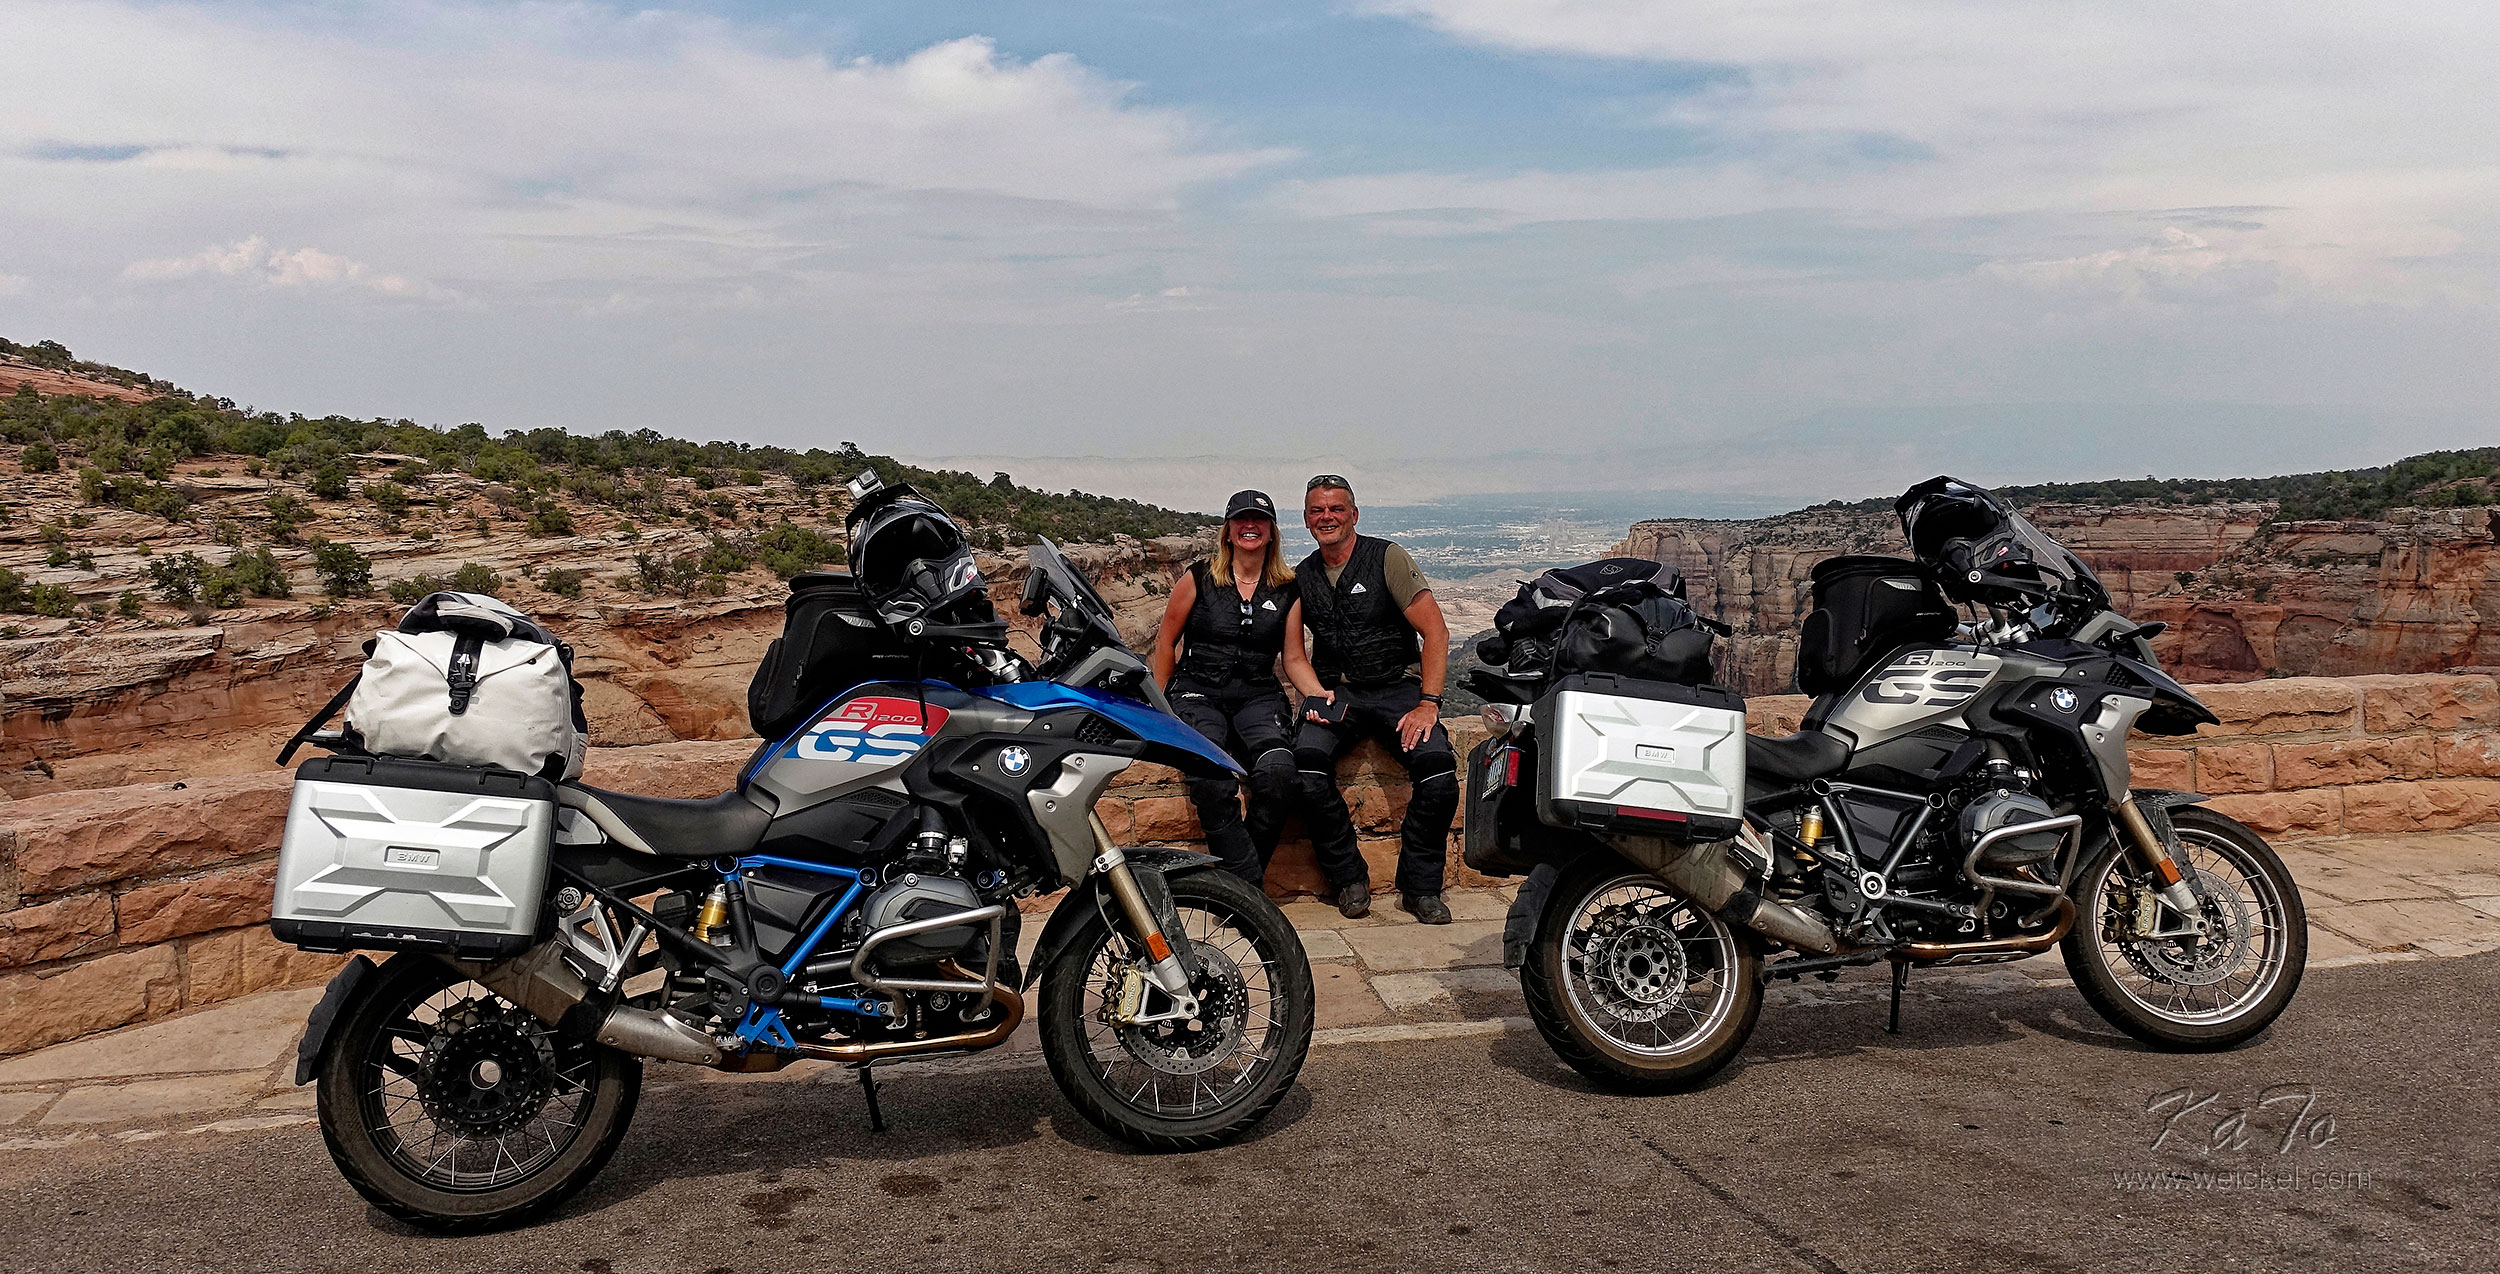 9020km through USA and Canada following Rocky Mountains